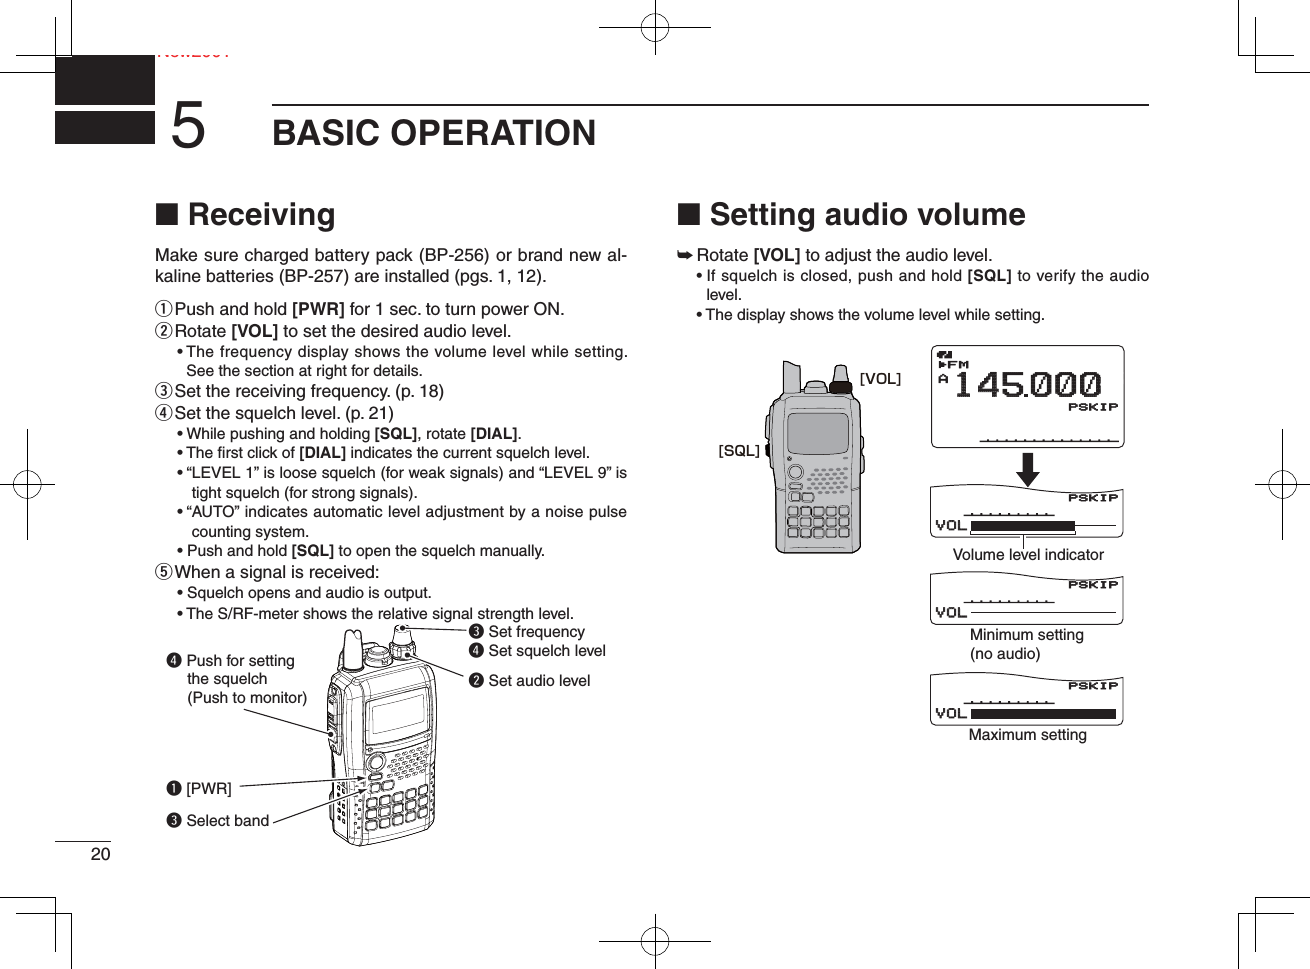 20NeNew2001BASIC OPERATION5■ ReceivingMake sure charged battery pack (BP-256) or brand new al-kaline batteries (BP-257) are installed (pgs. 1, 12).q Push and hold [PWR] for 1 sec. to turn power ON.w  Rotate [VOL] to set the desired audio level. •  The frequency display shows the volume level while setting. See the section at right for details.e Set the receiving frequency. (p. 18)r Set the squelch level. (p. 21)• While pushing and holding [SQL], rotate [DIAL].• The ﬁ rst click of [DIAL] indicates the current squelch level.• “ LEVEL 1” is loose squelch (for weak signals) and “LEVEL 9” is tight squelch (for strong signals).• “ AUTO” indicates automatic level adjustment by a noise pulse counting system.• Push and hold [SQL] to open the squelch manually.t  When a signal is received:• Squelch opens and audio is output.• The S/RF-meter shows the relative signal strength level.■ Setting audio volume➥  Rotate [VOL] to adjust the audio level.  •  If squelch is closed, push and hold [SQL] to verify the audio level.  • The display shows the volume level while setting.q [PWR]e Set frequencyr Set squelch levelw Set audio levele Select bandr Push for setting    the squelch    (Push to monitor)μ000000VOLVOLμ000000VOLVOLμ000000VOLVOLAMemoNameMemoNameμPRIOPRIO WXEMREMRDTCSDTCSFMLOWLOWATTATT14145000PSKIPPSKIPPSKIPPSKIP+DUP+DUP2525000000Minimum setting(no audio)Volume level indicatorMaximum setting[VOL][SQL]